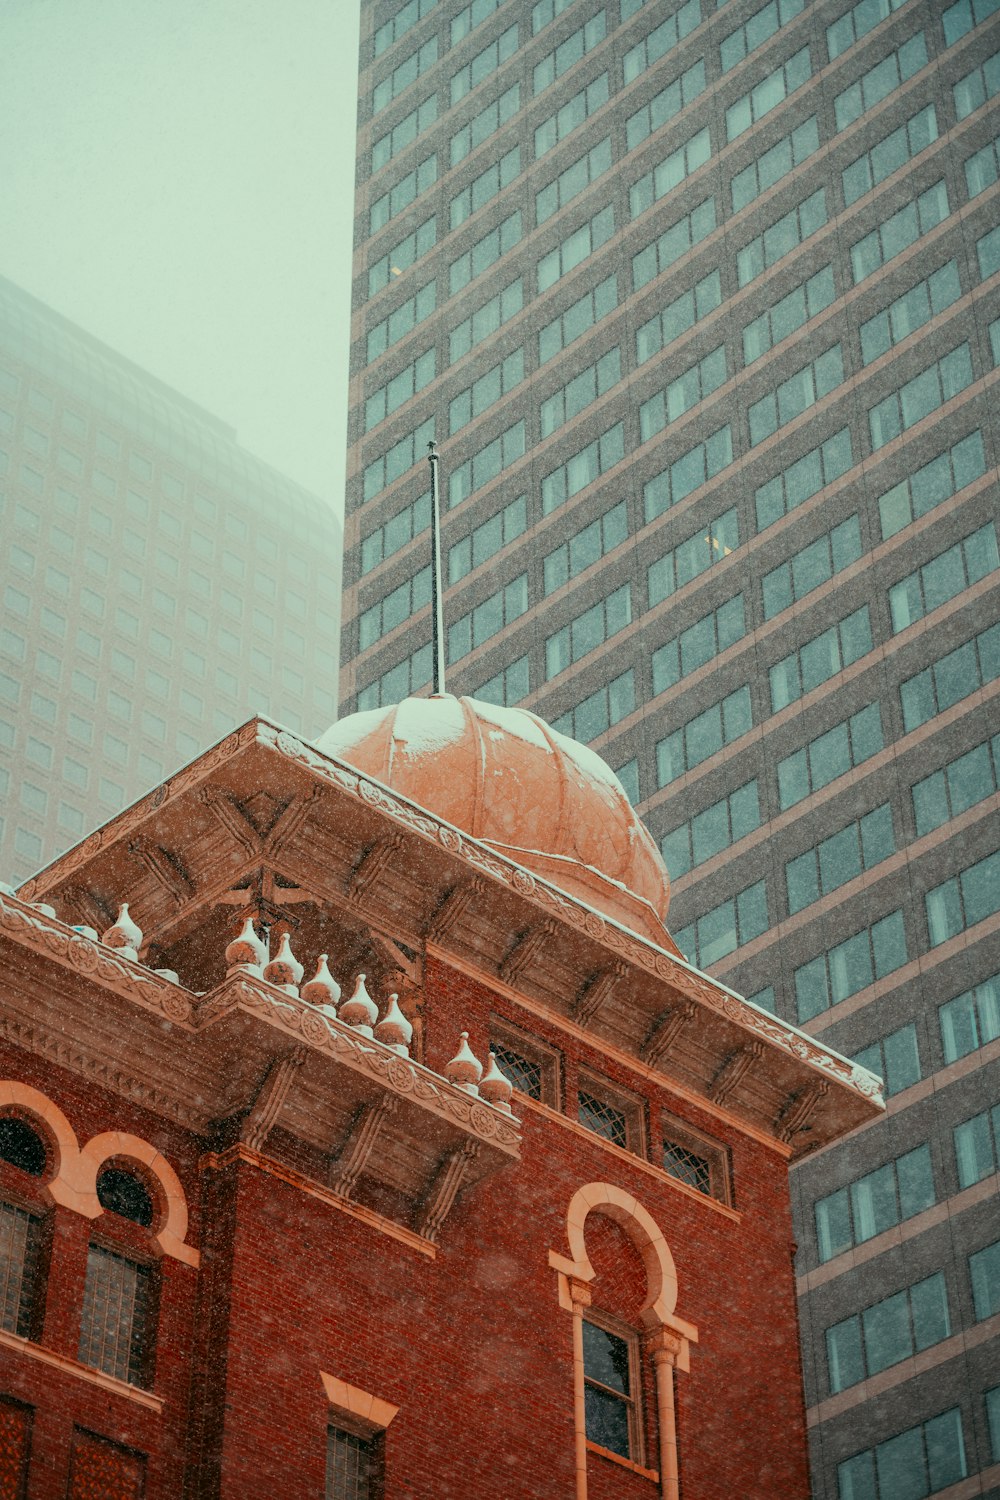 a red brick building with a dome on top